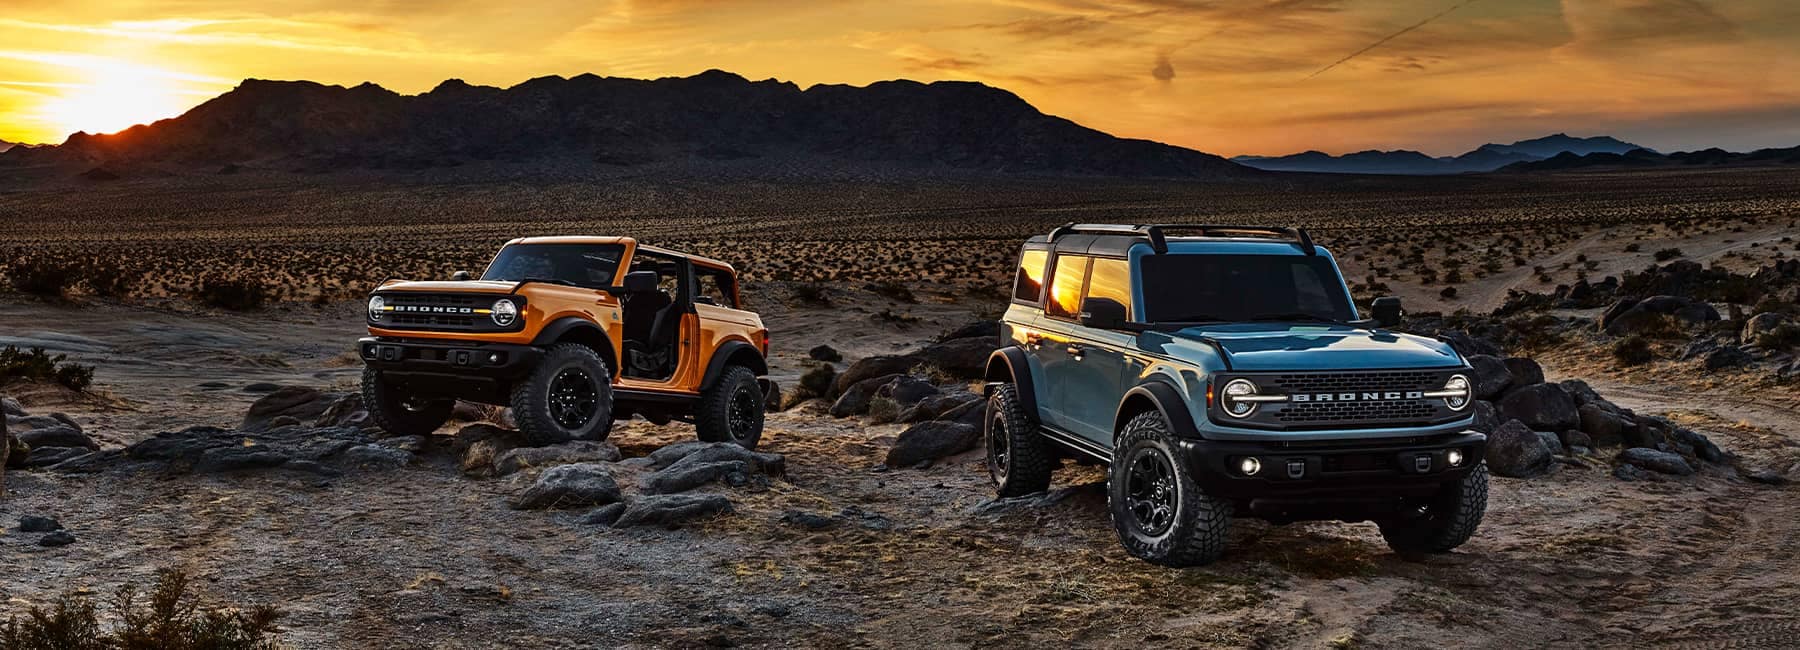 2021 Ford Broncos in the desert at sunset